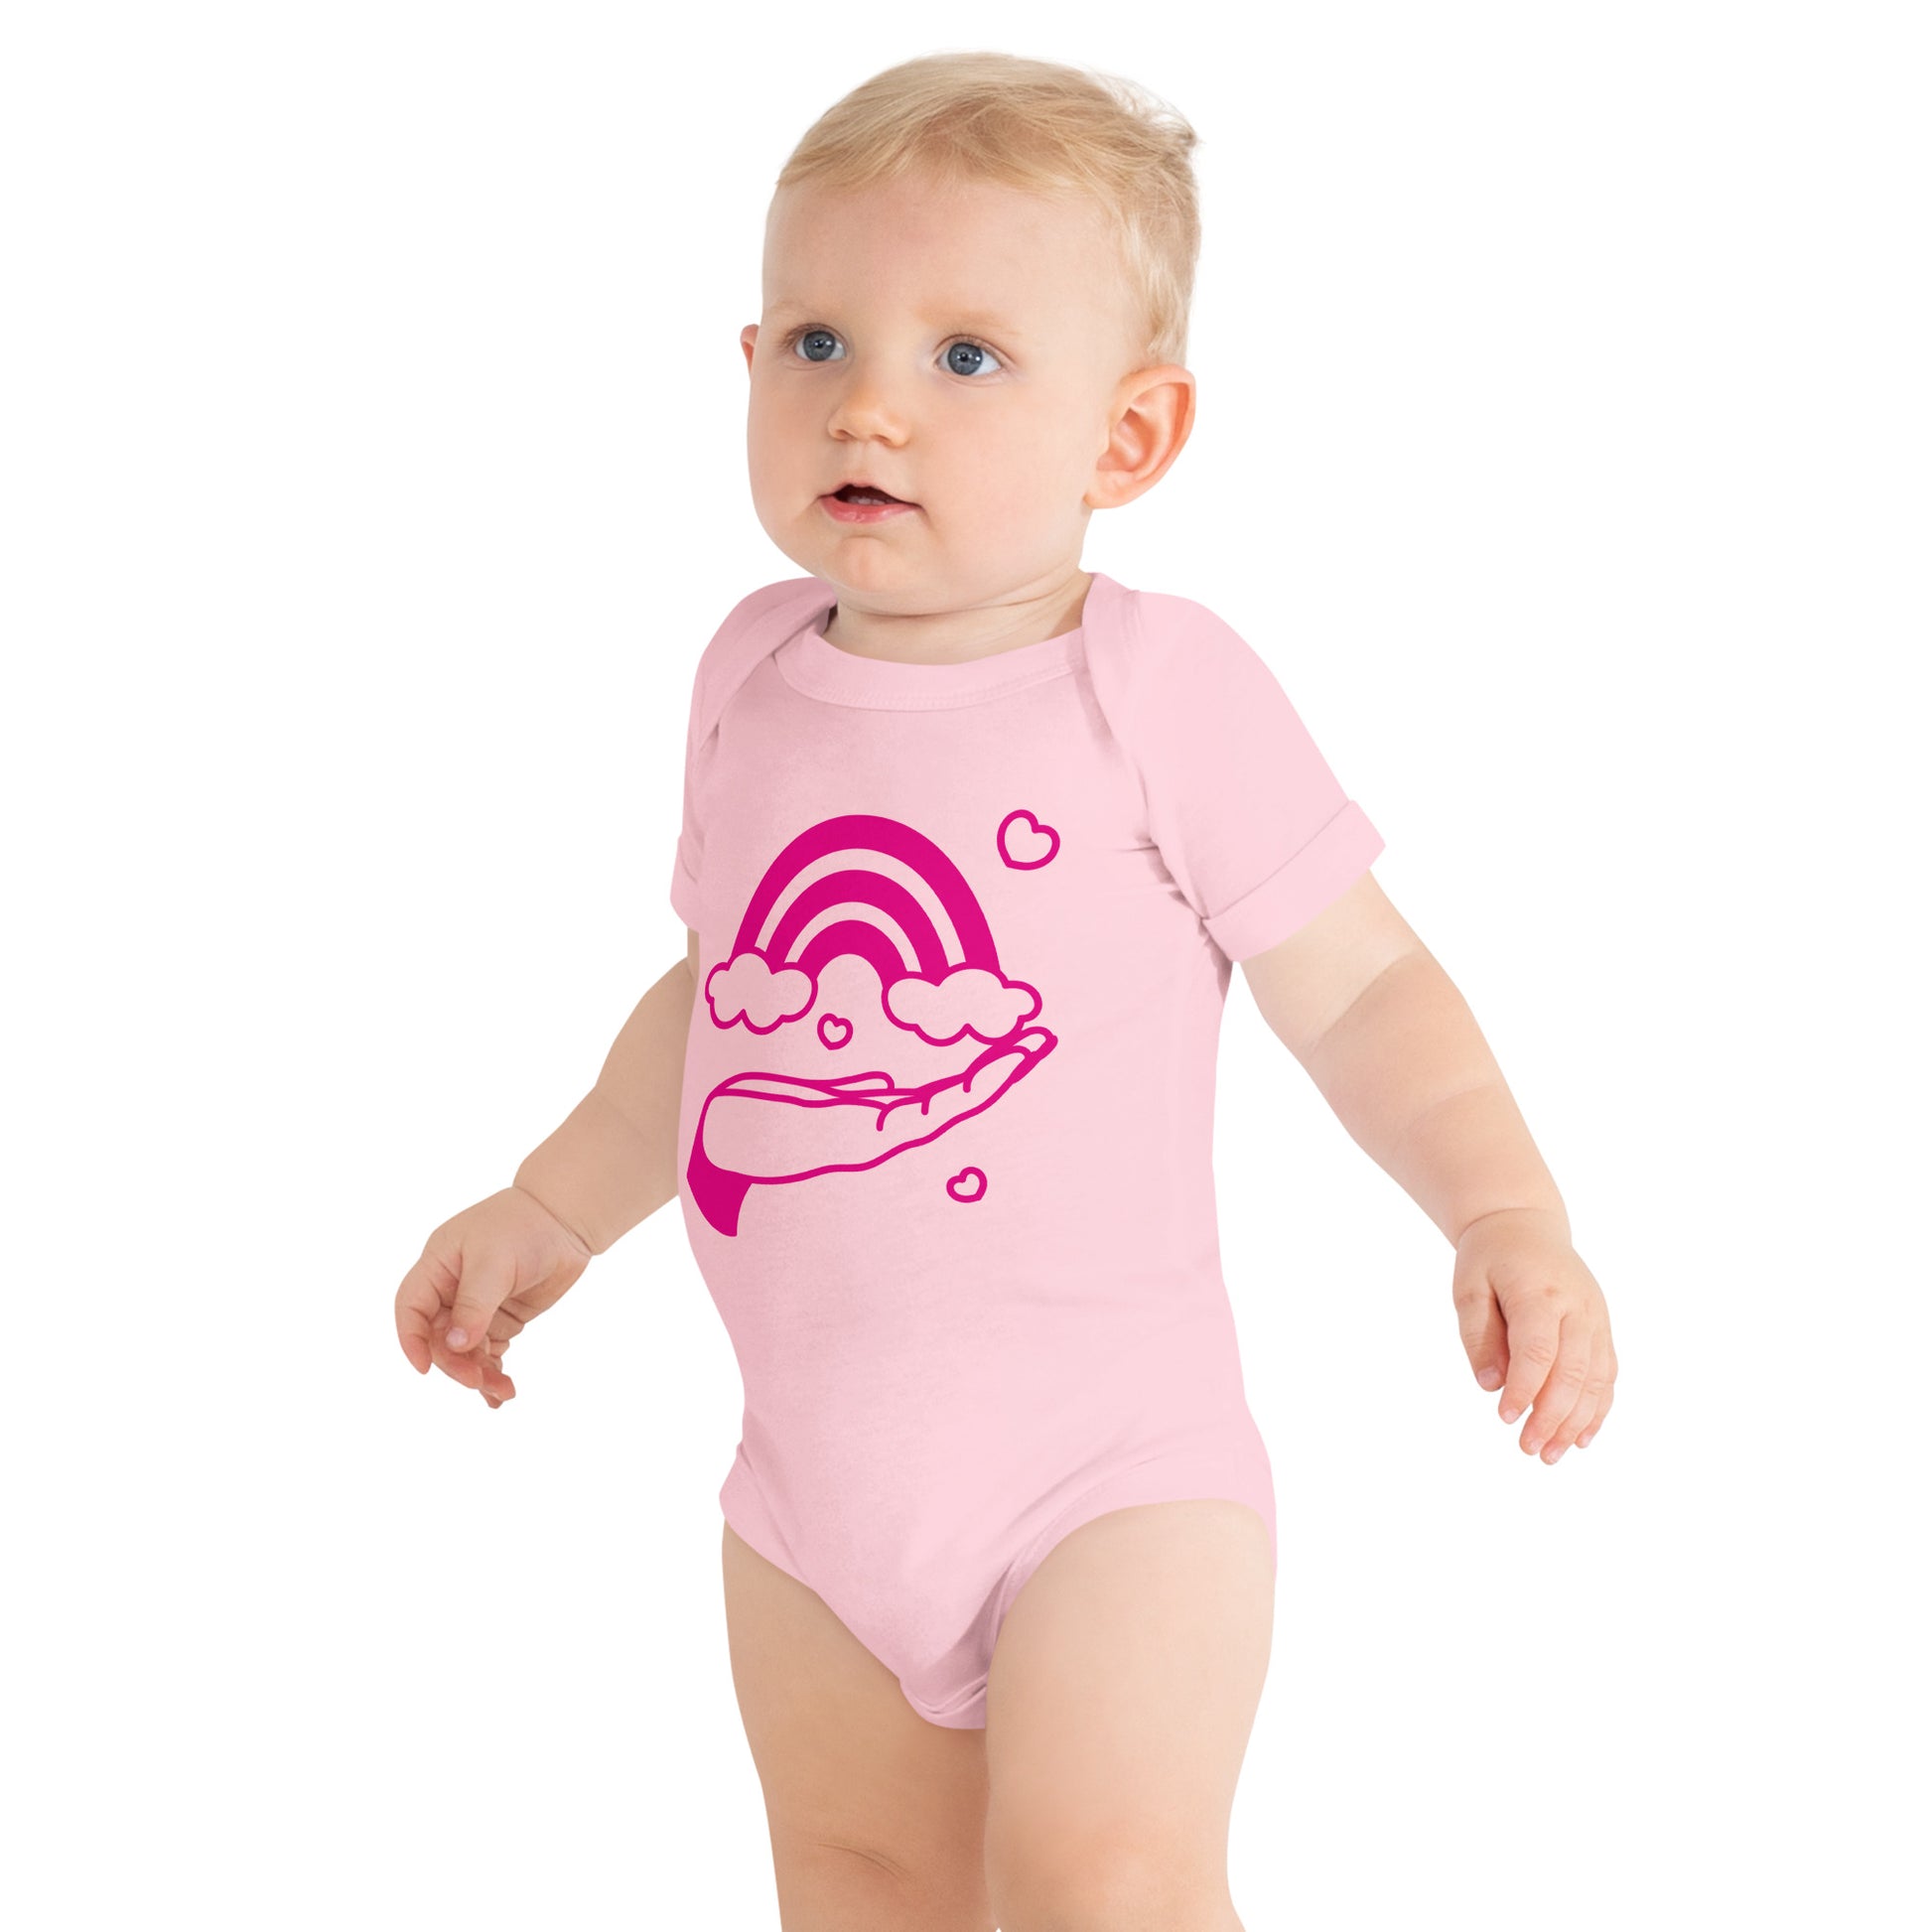 baby with pink short sleeve one piece with print of pink hand holding a pink rainbow